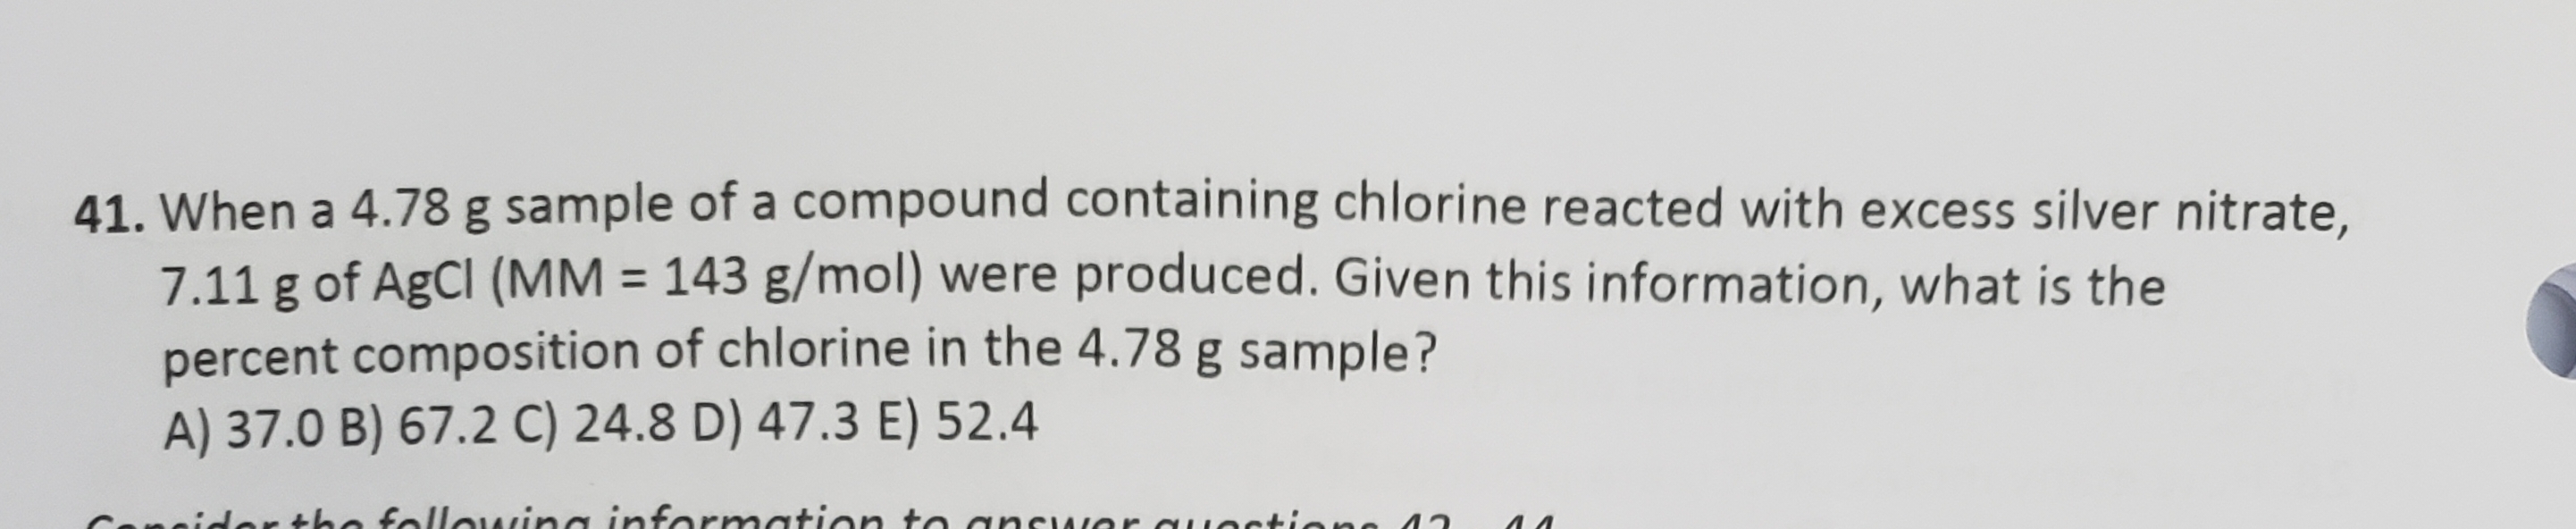 41. When a 4.78 g sample of a compound containing chlorine reacted with excess silver nitrate,
7.11 g of AgCl (MM 143 g/mol) were produced. Given this information, what is the
percent composition of chlorine in the 4.78 g sample?
A) 37.0 B) 67.2 C) 24.8 D) 47.3 E) 52.4
